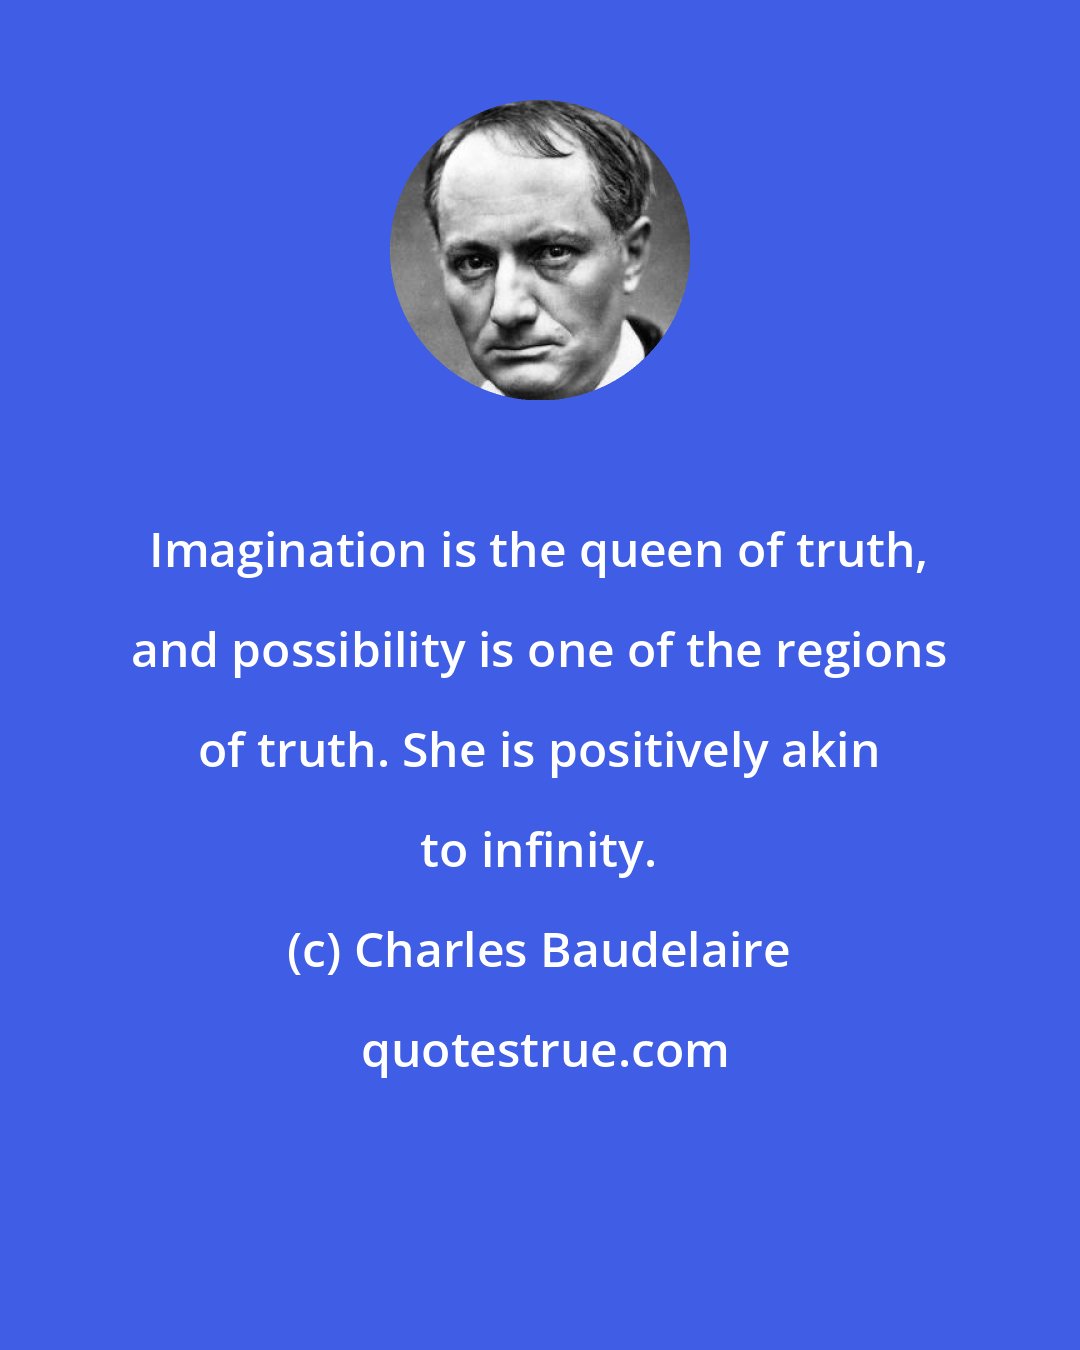 Charles Baudelaire: Imagination is the queen of truth, and possibility is one of the regions of truth. She is positively akin to infinity.